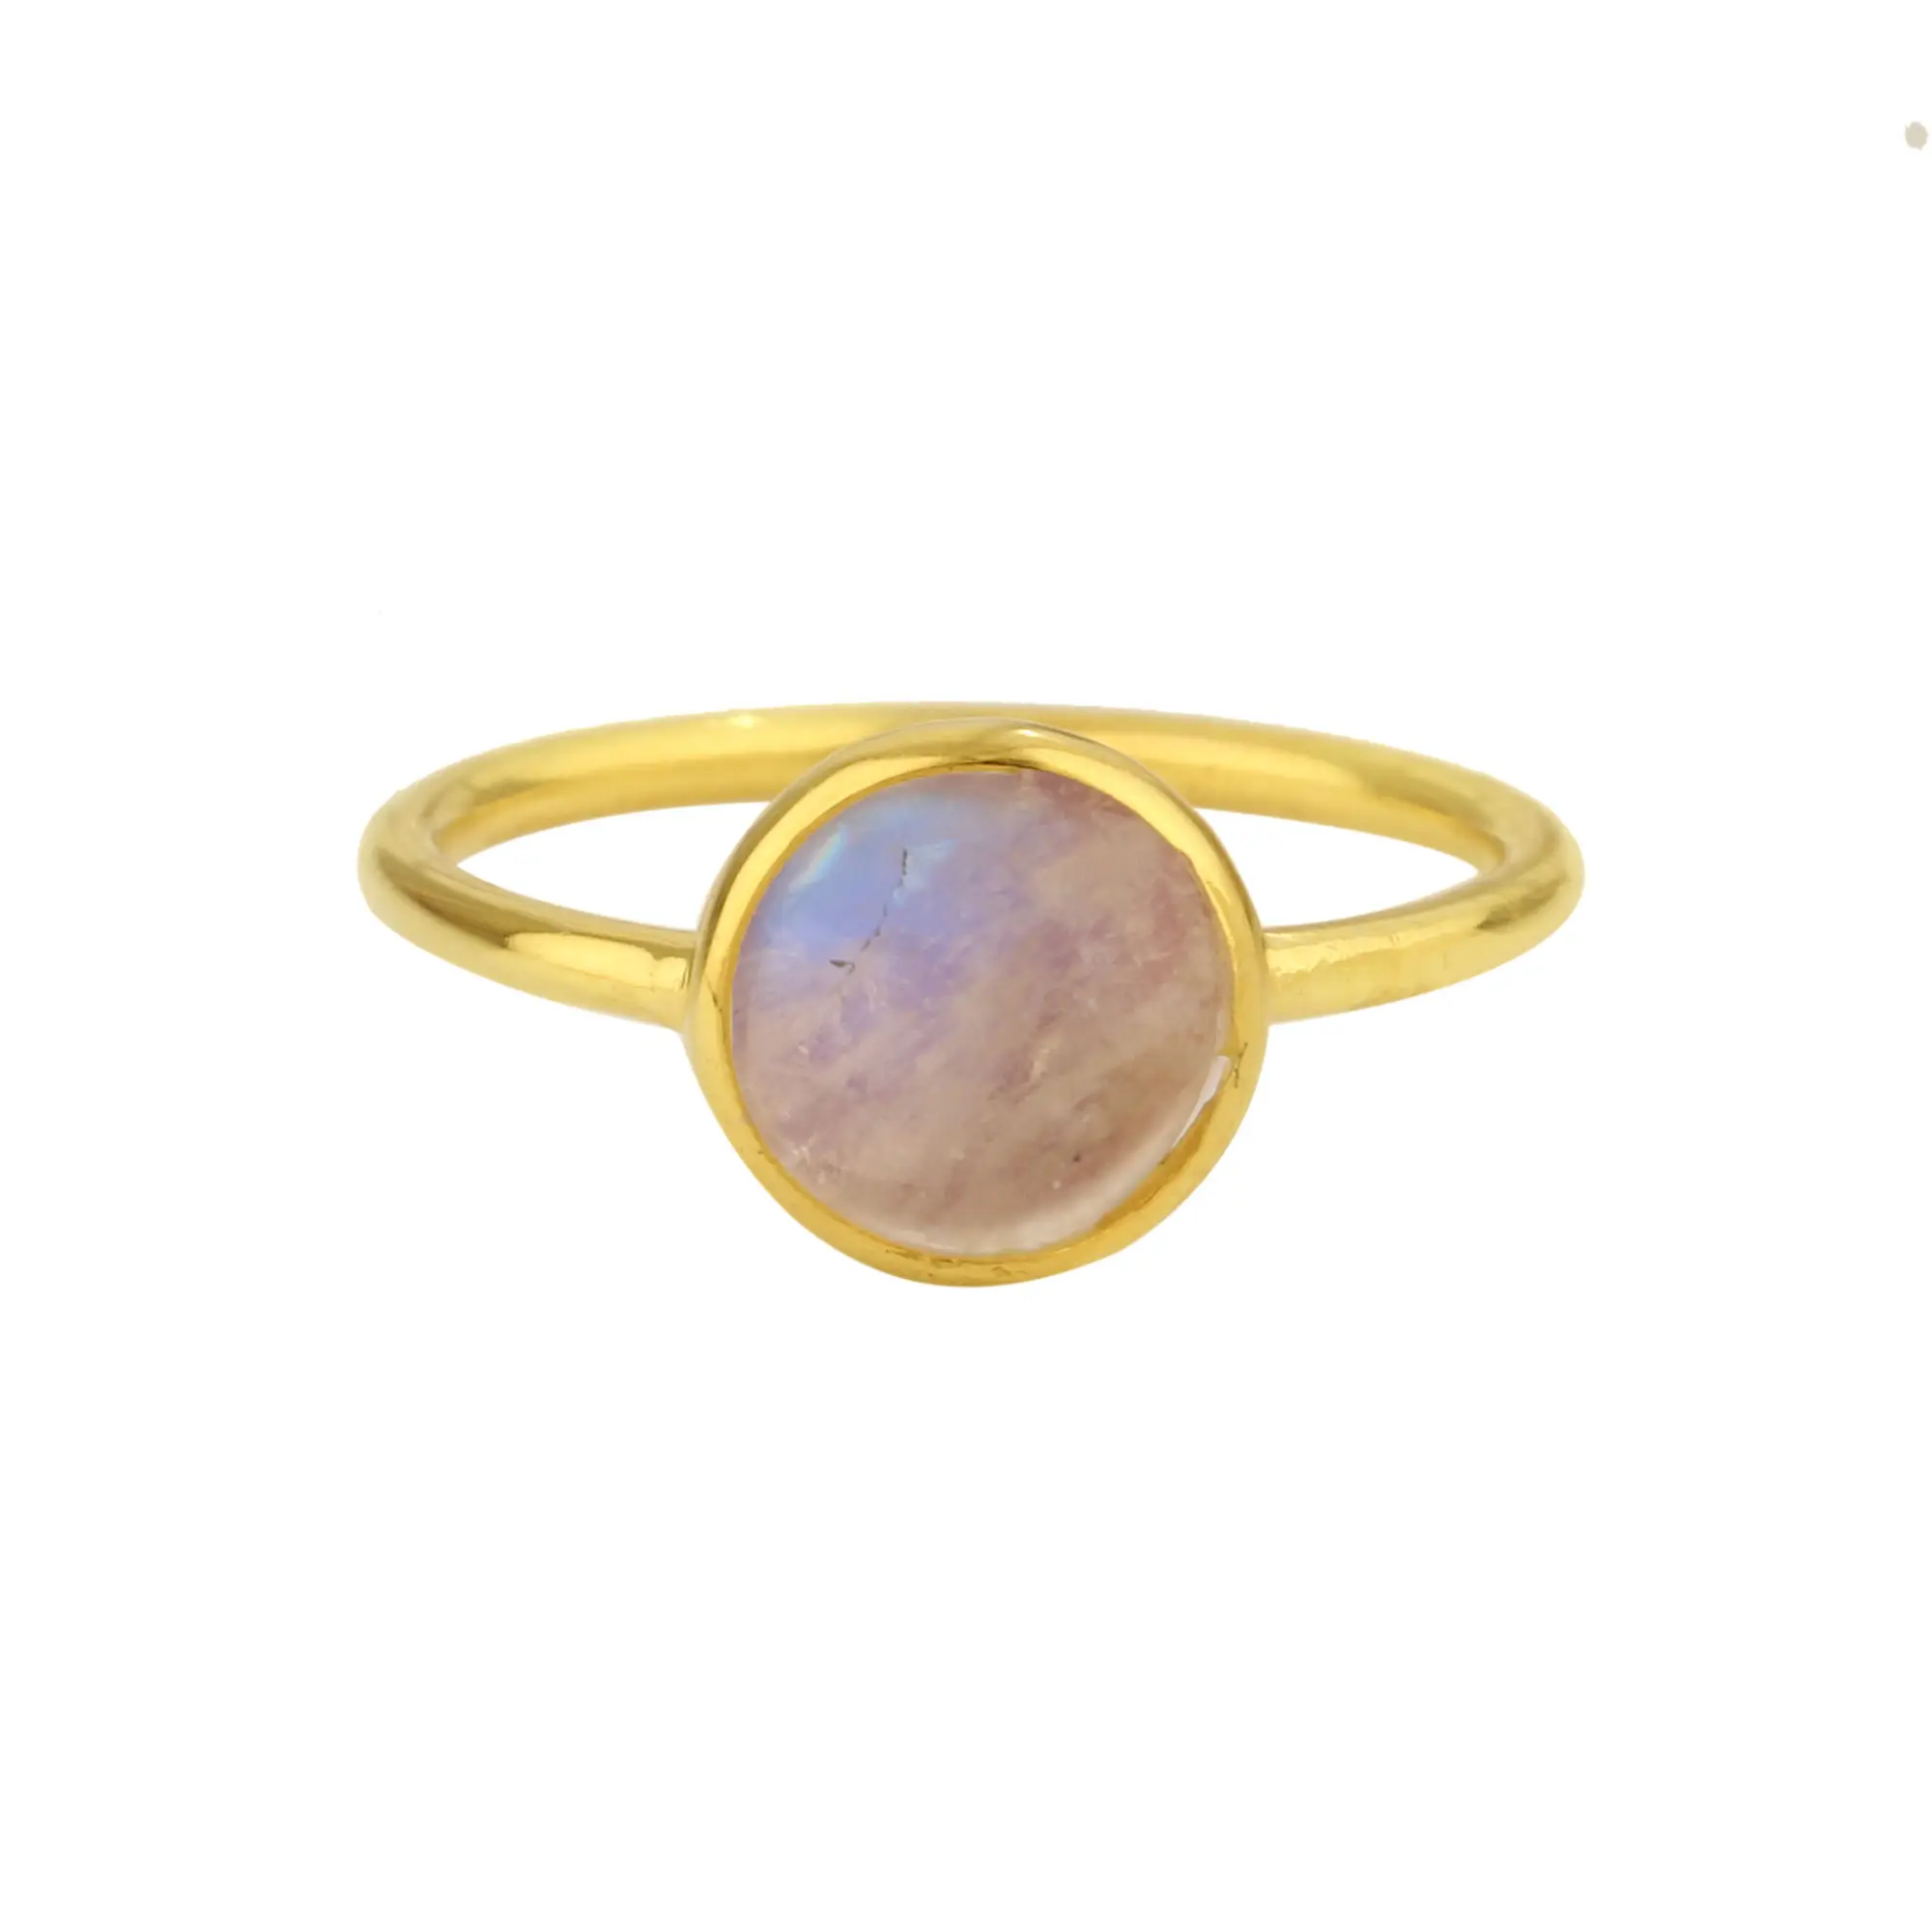 Beautiful natural rainbow moonstone ring design hot sale indian jewelry wholesale 925 sterling silver bezel gold plated ring